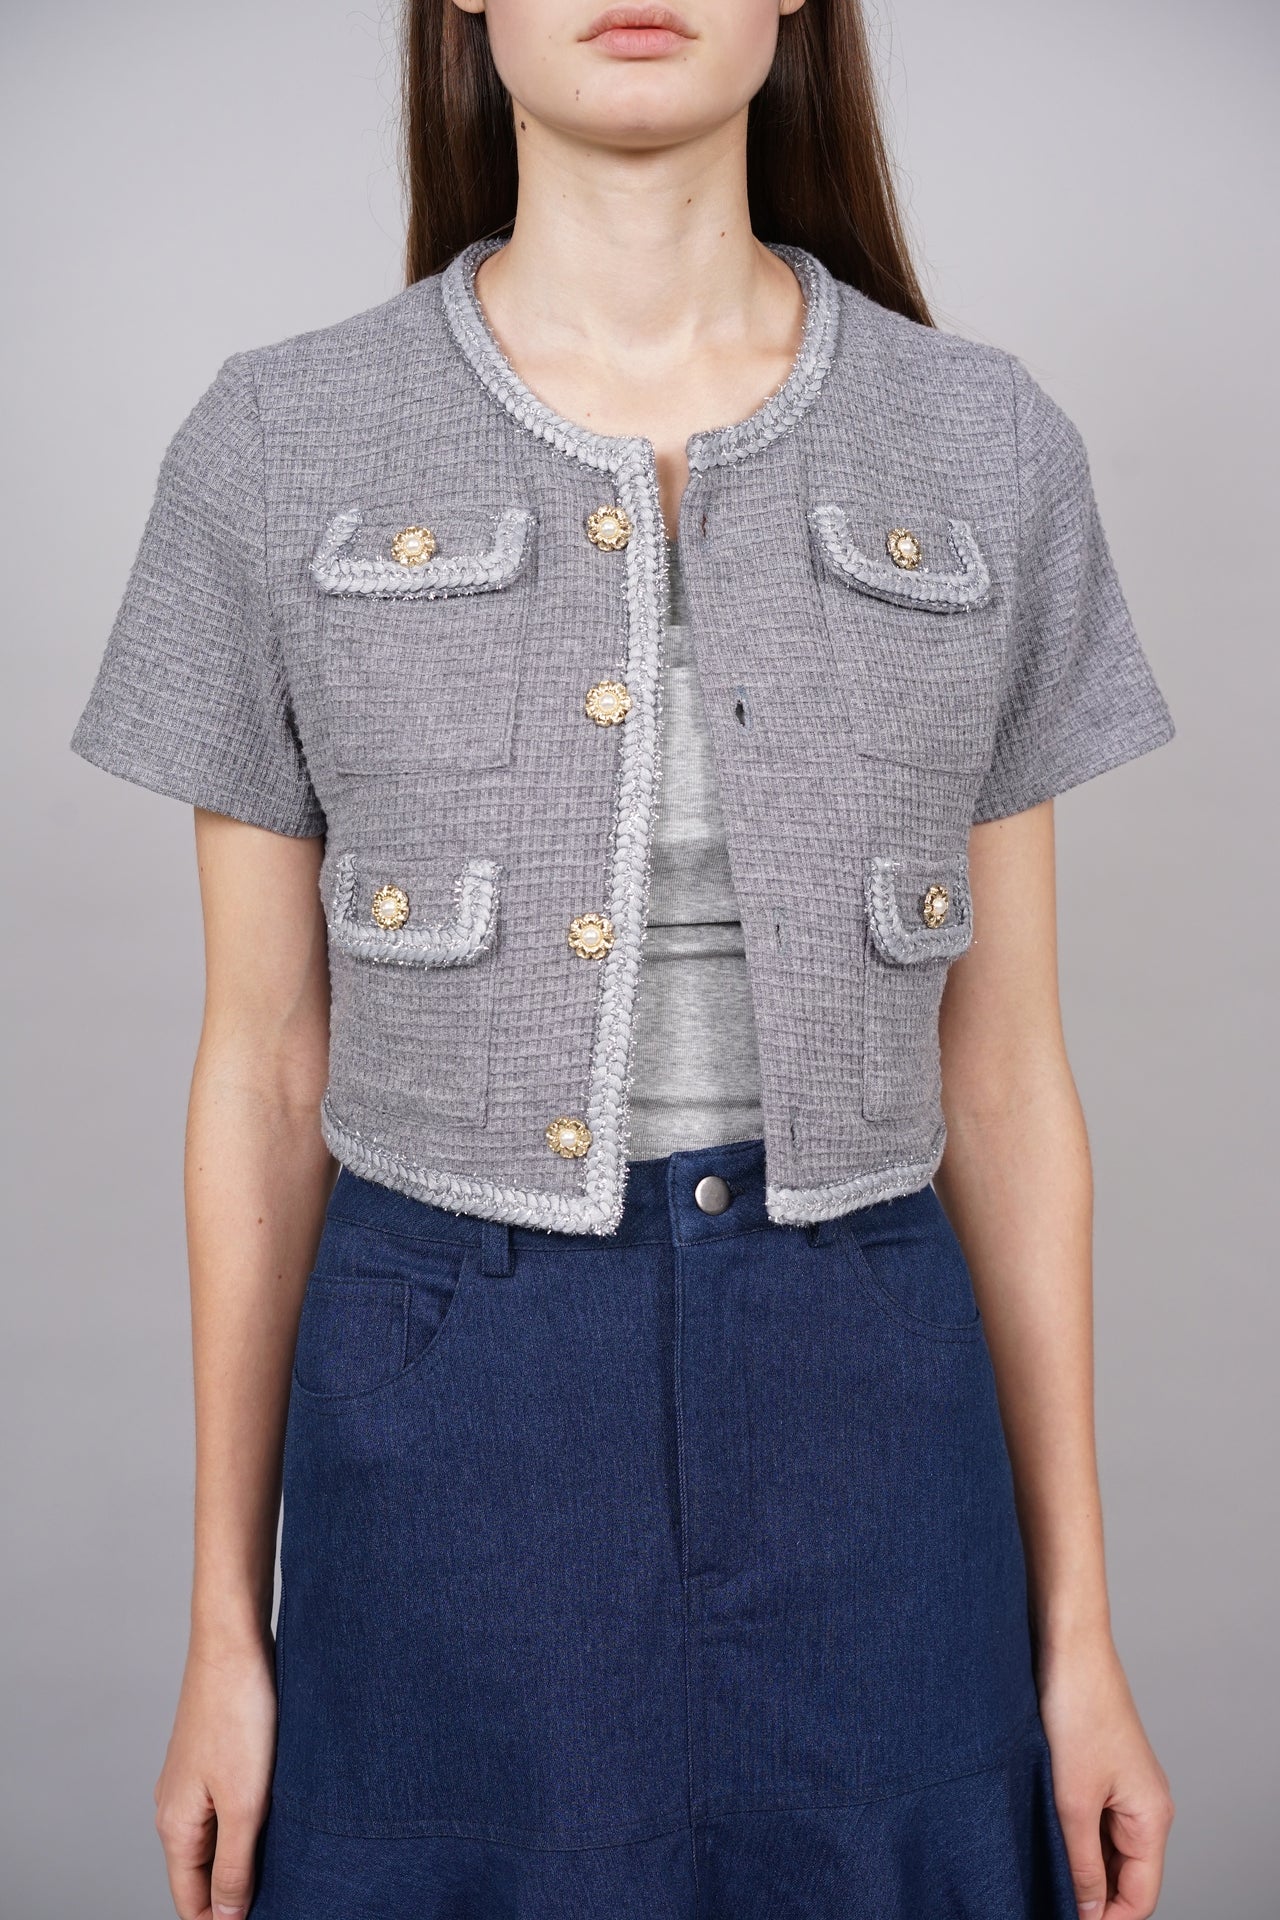 Braid Trim Buttoned Top in Grey - Arriving Soon